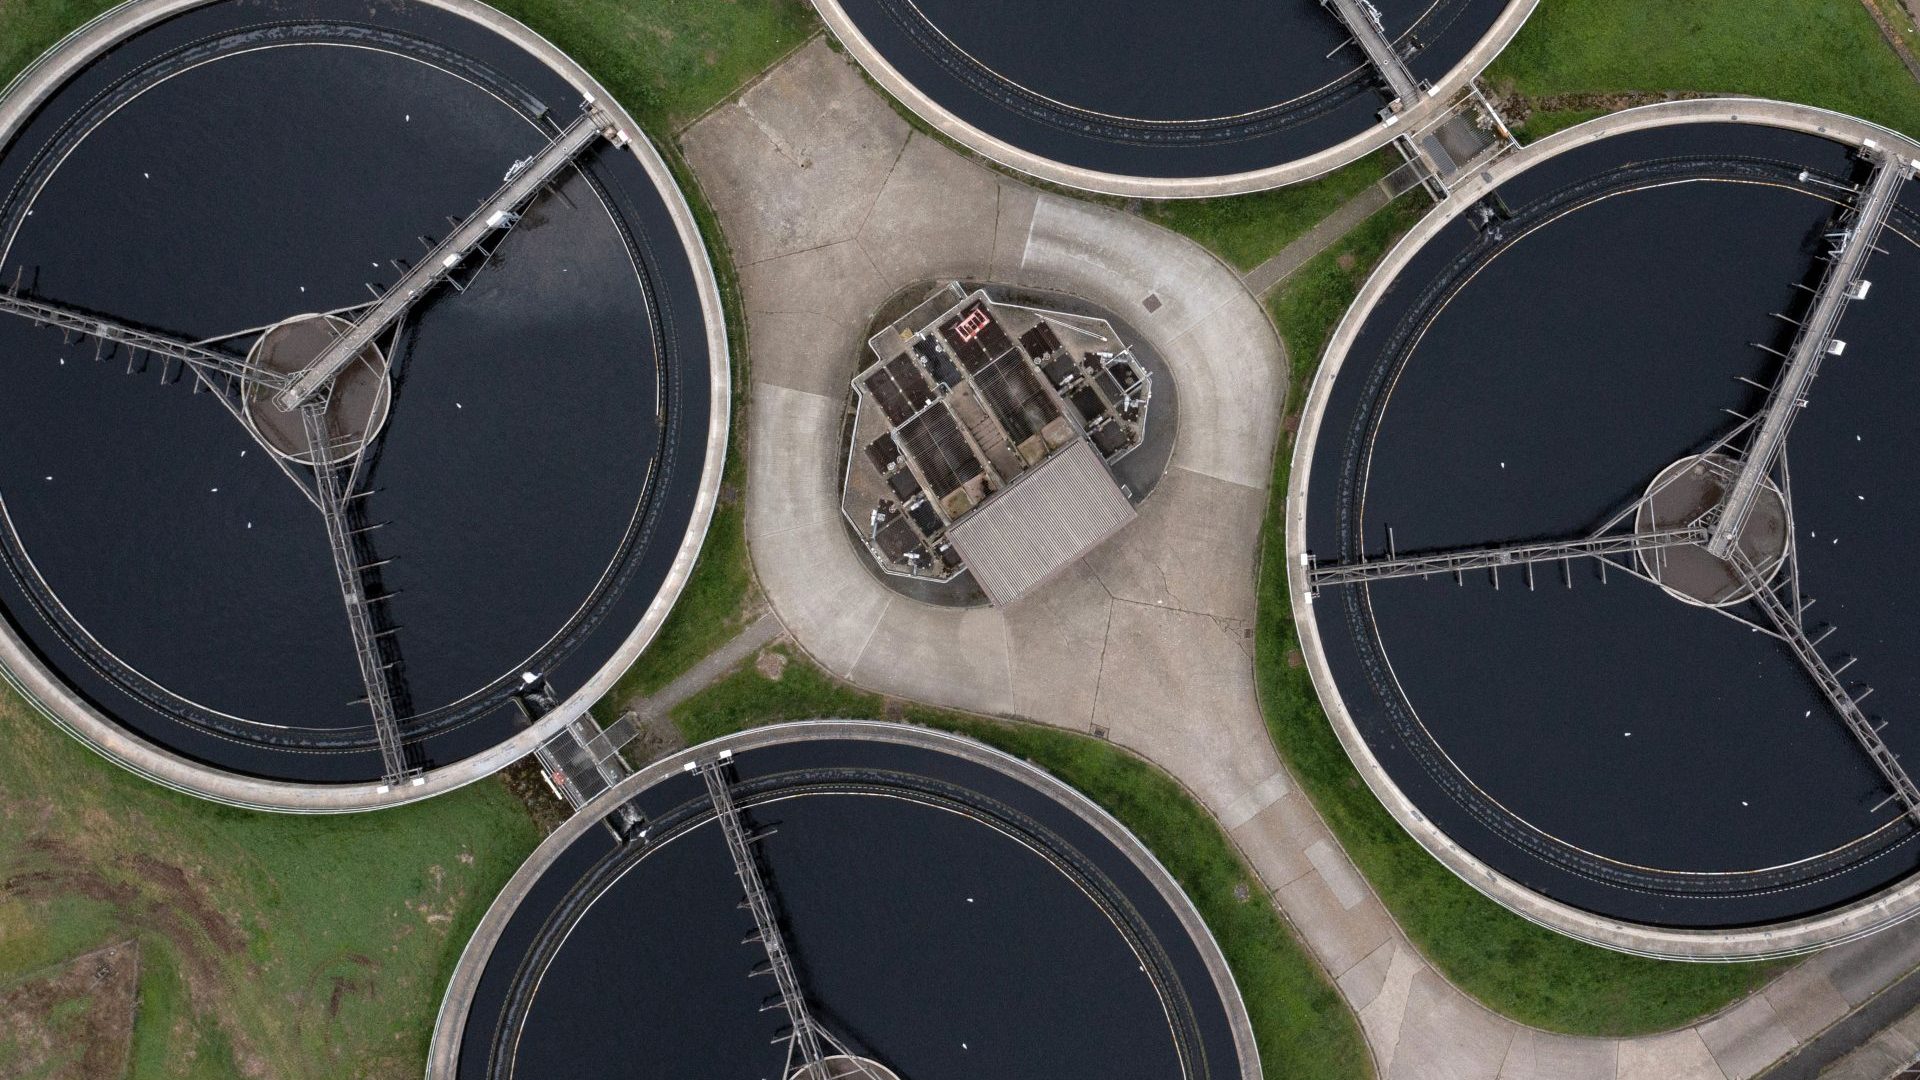 Thames Water’s Long Reach water treatment facility on the banks of the Thames estuary in Dartford, Kent. Photo: Ben Stansall/AFP/Getty